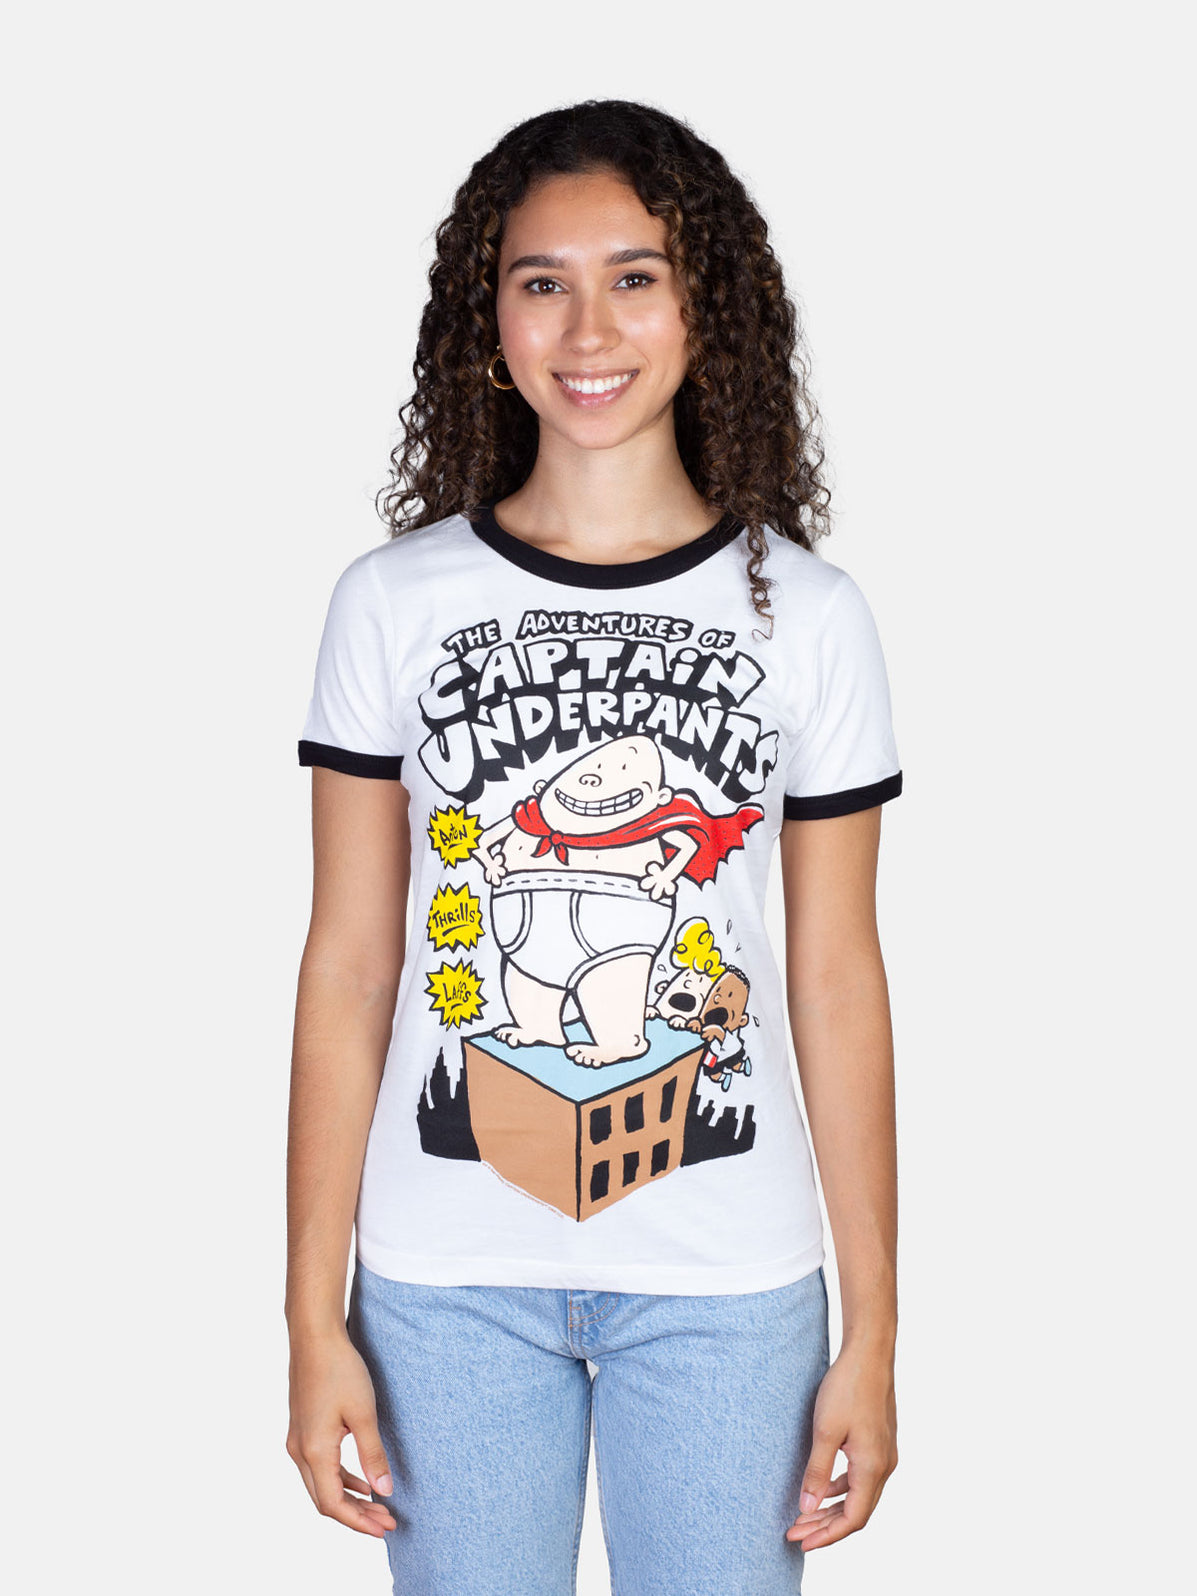 The Adventures of Captain Underpants women's t-shirt — Out of Print